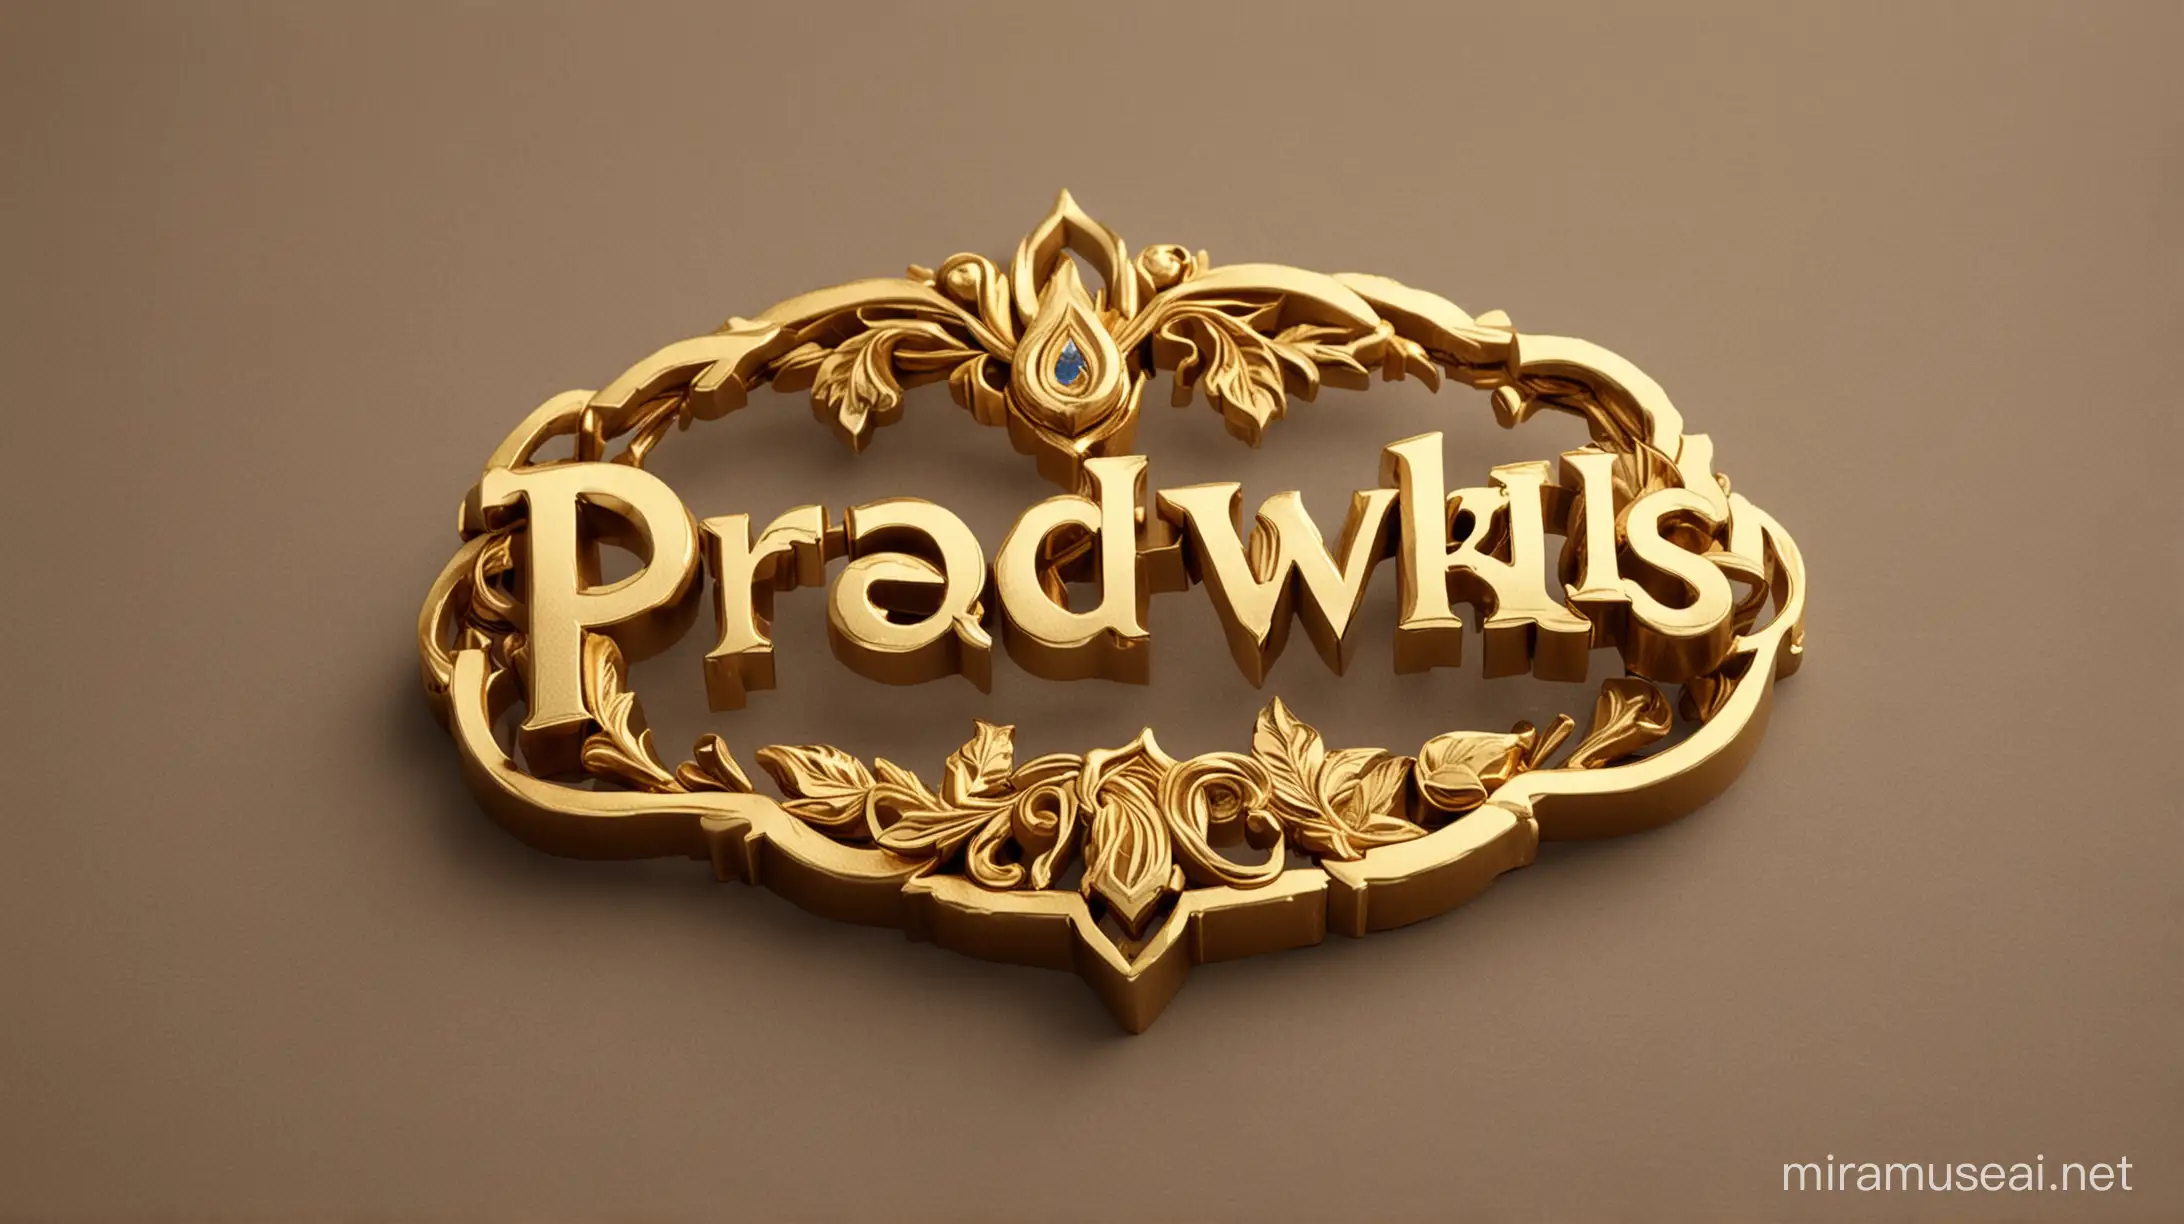 a good looking logo to my jewelry shop named as PradeepGoldWorks with the gold color background